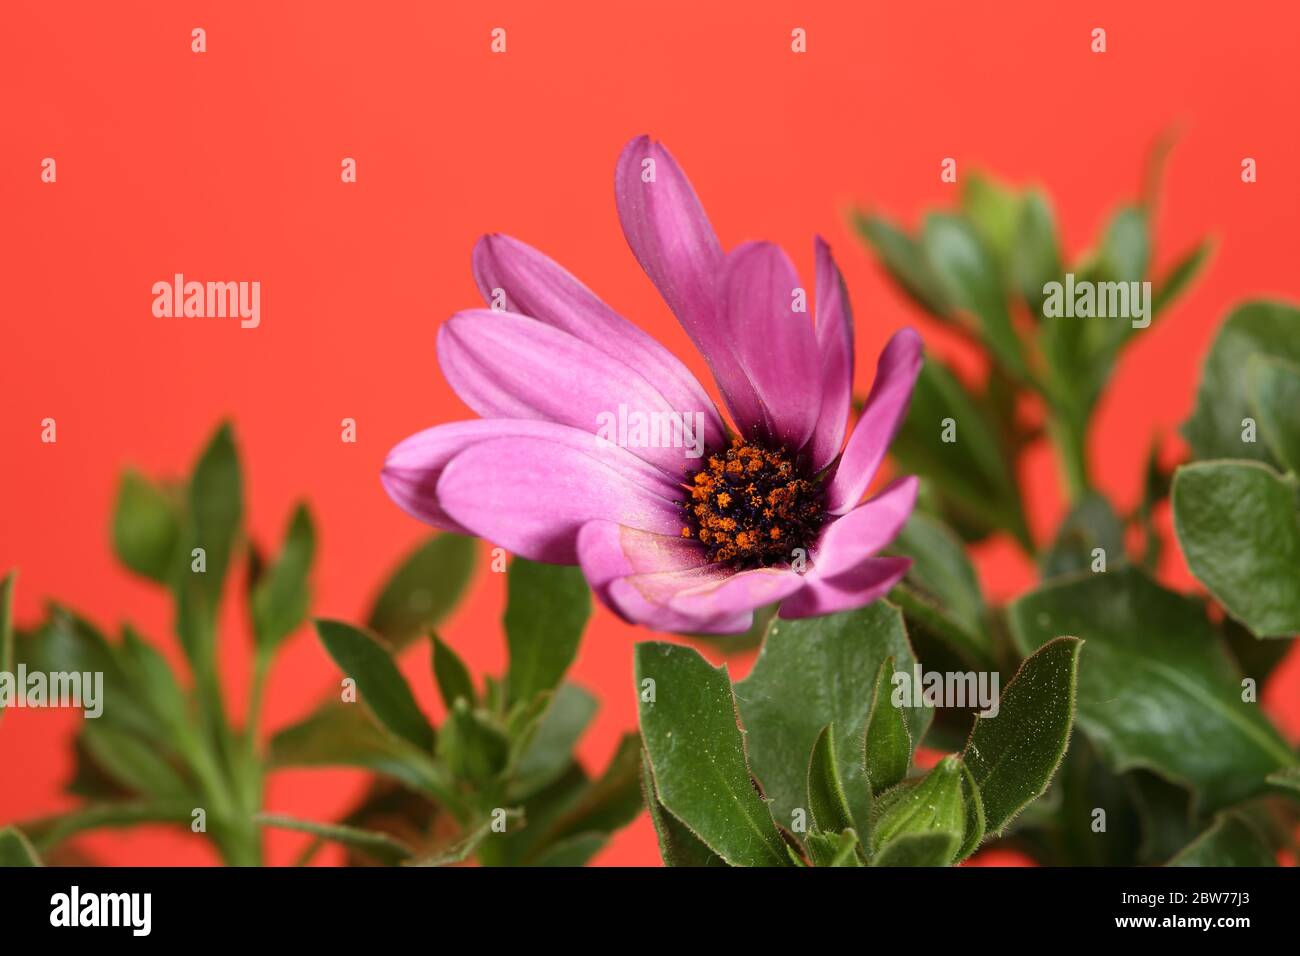 Purple flower with orange stamens inside, partly in soft focus, with green leaves on, macro, on red  background Stock Photo